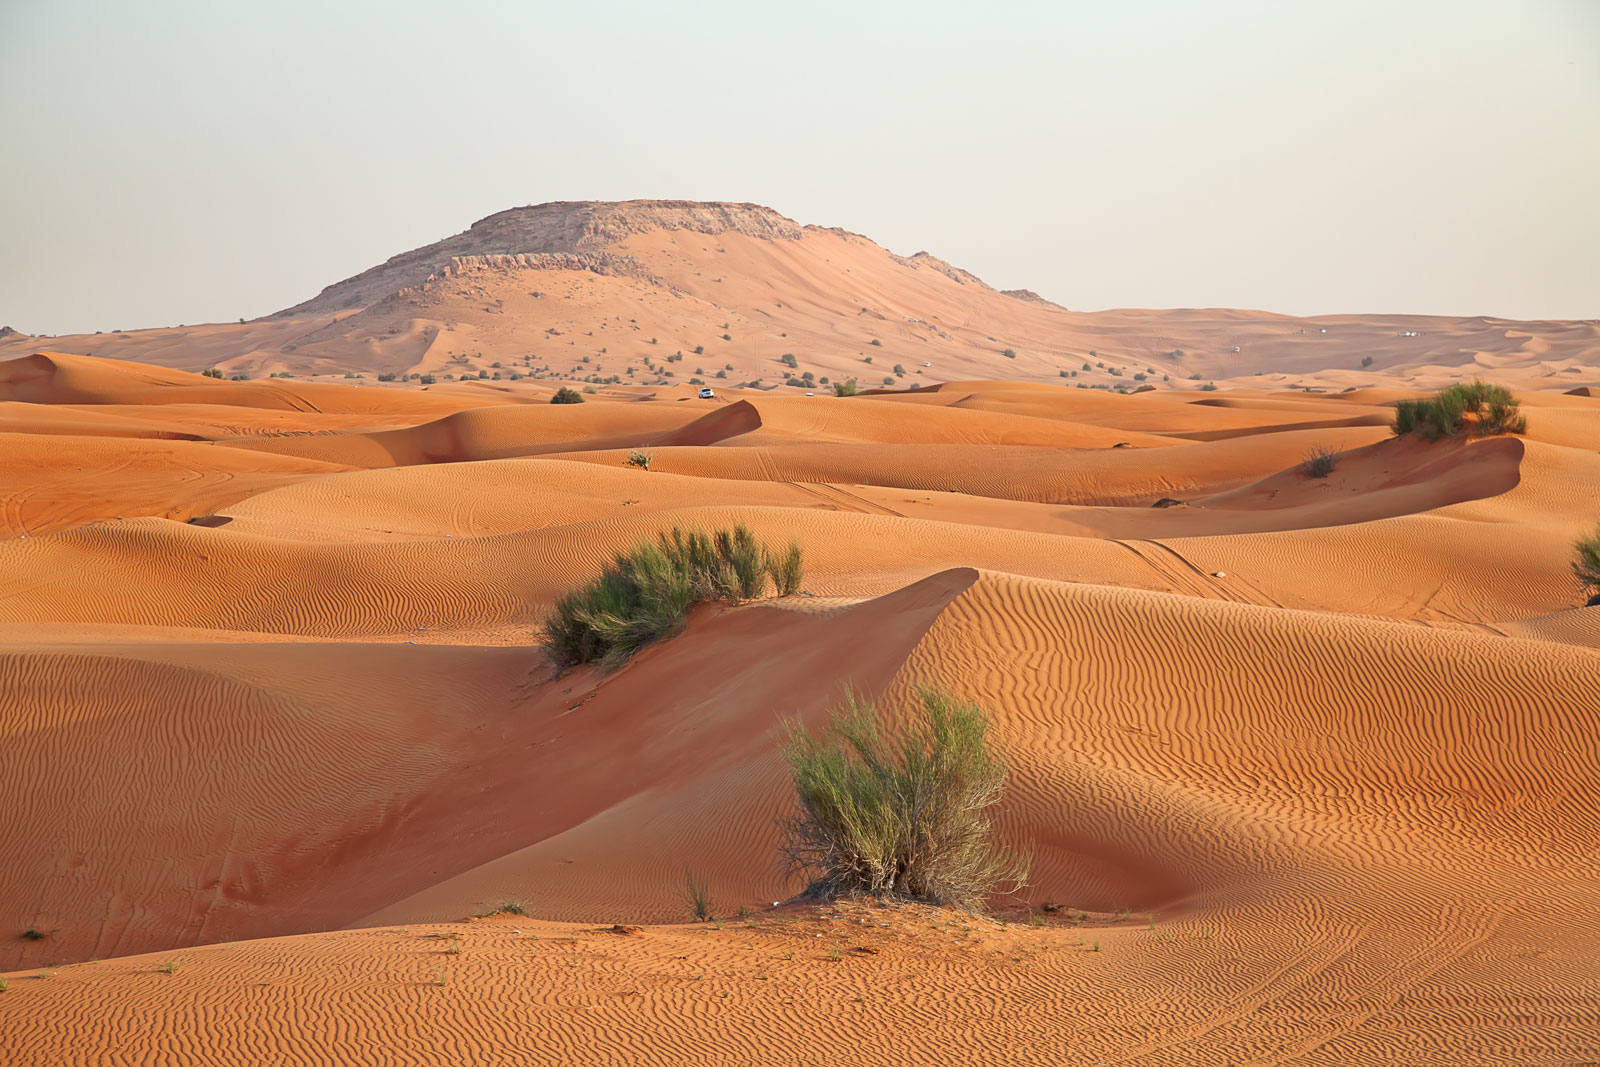 Can You Make It Through the Geography Version of “Two Truths and a Lie”? Arabian Desert